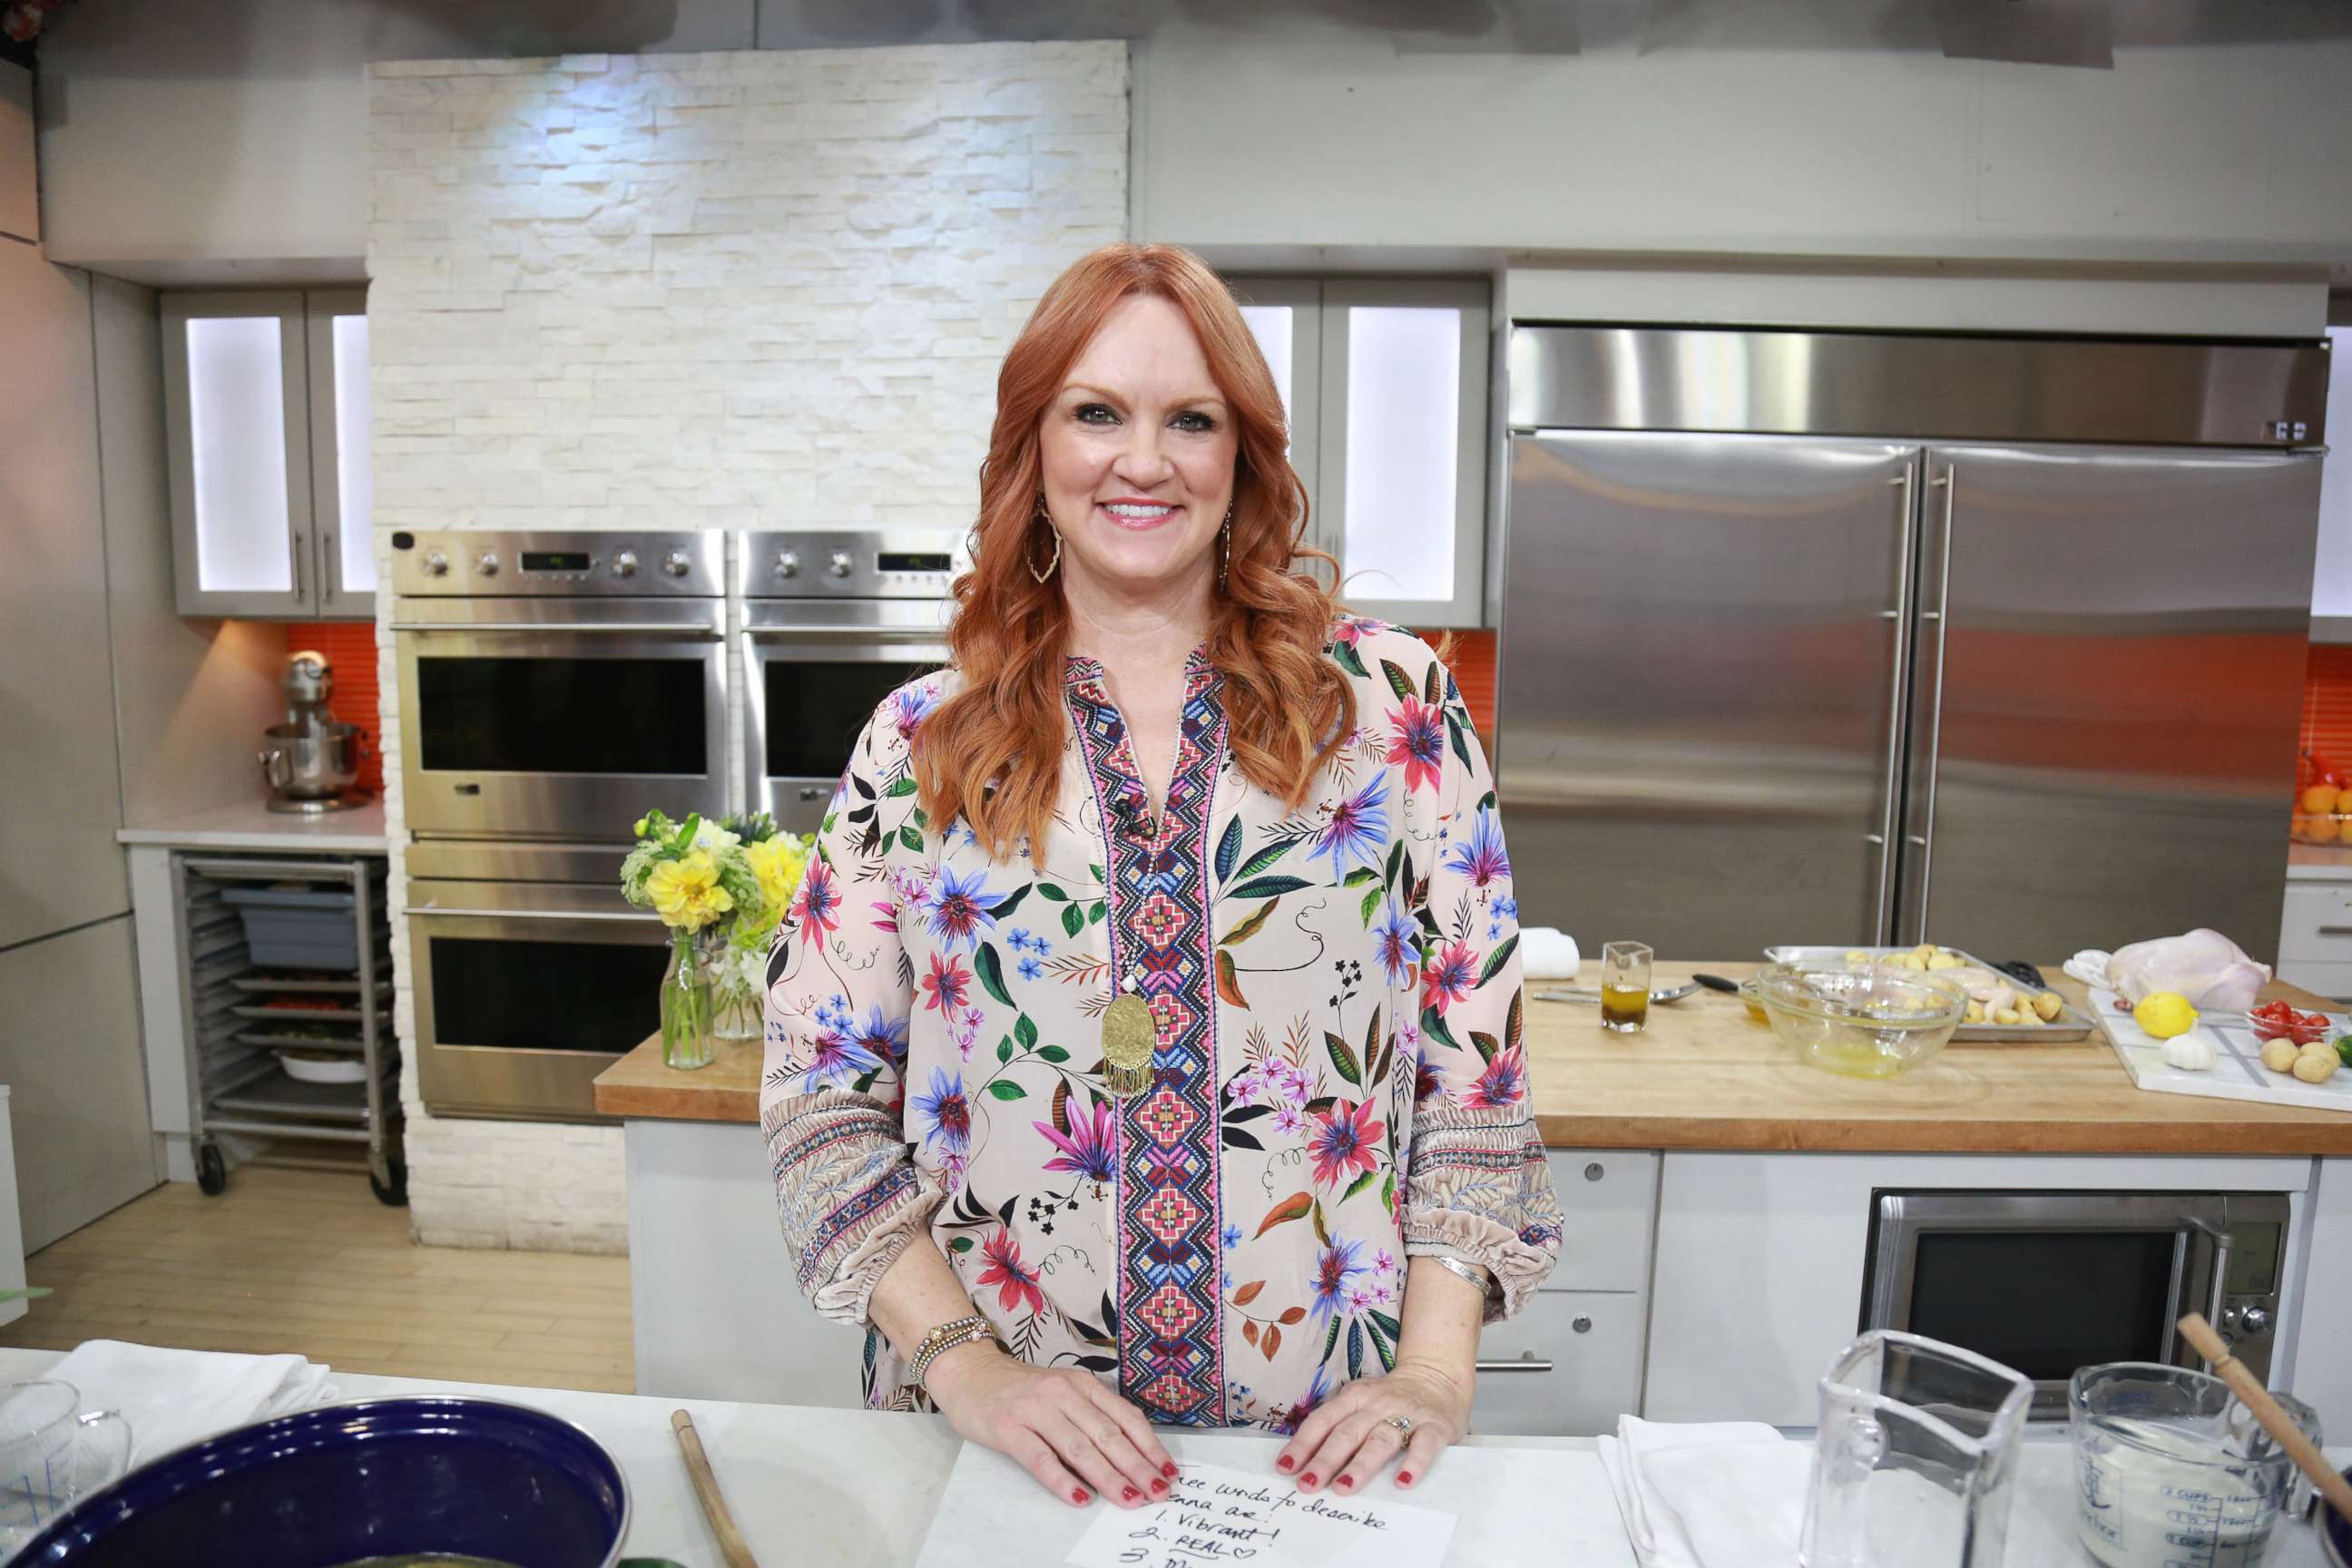 The Pioneer Woman' Ree Drummond stars in 1st Food Network holiday